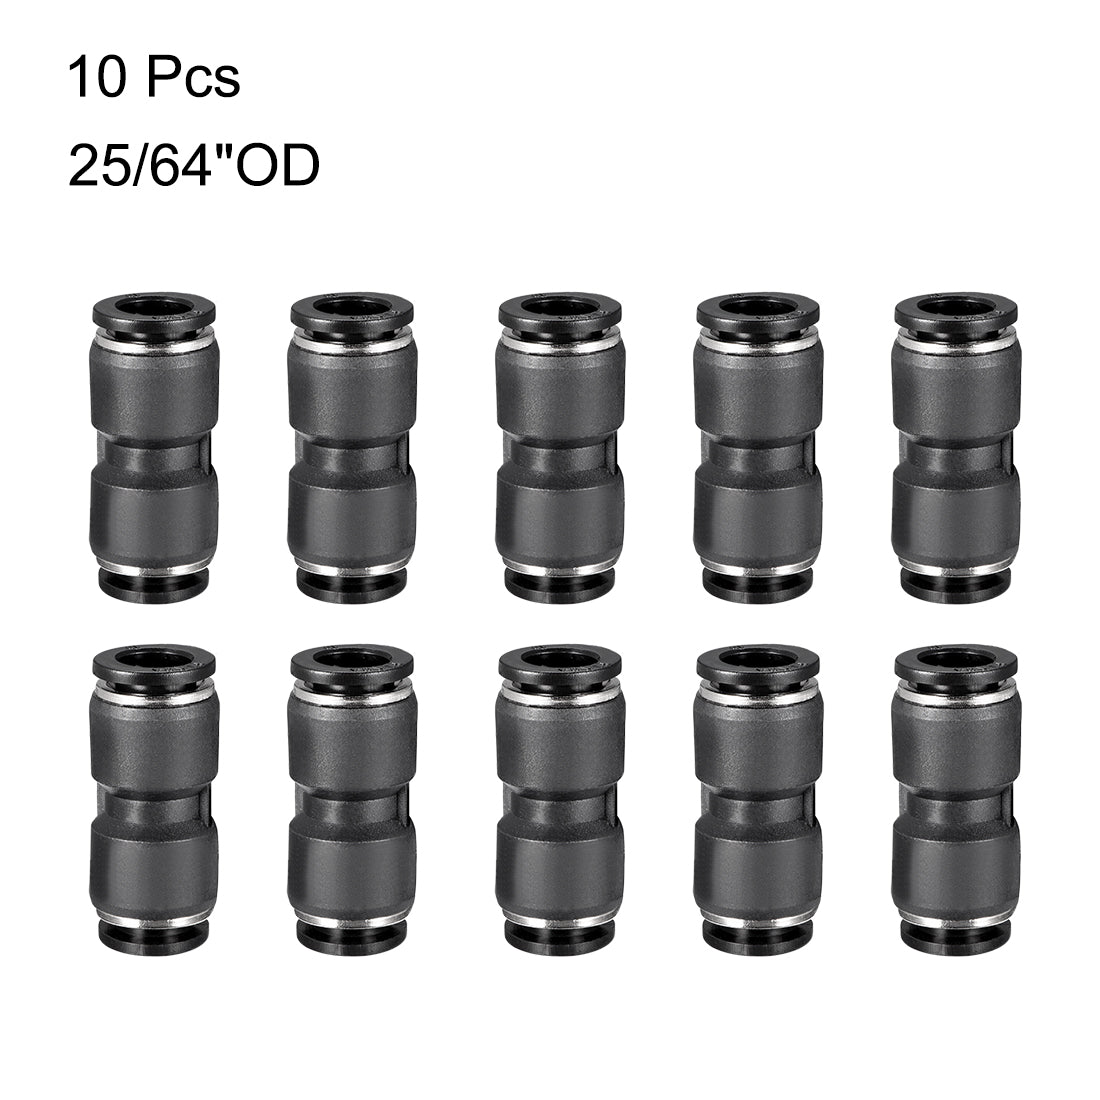 uxcell Uxcell 10pcs Push to Connect Fittings Tube Connect  10mm or 25/64" Straight od Push Fit Fittings Tube Fittings Push Lock